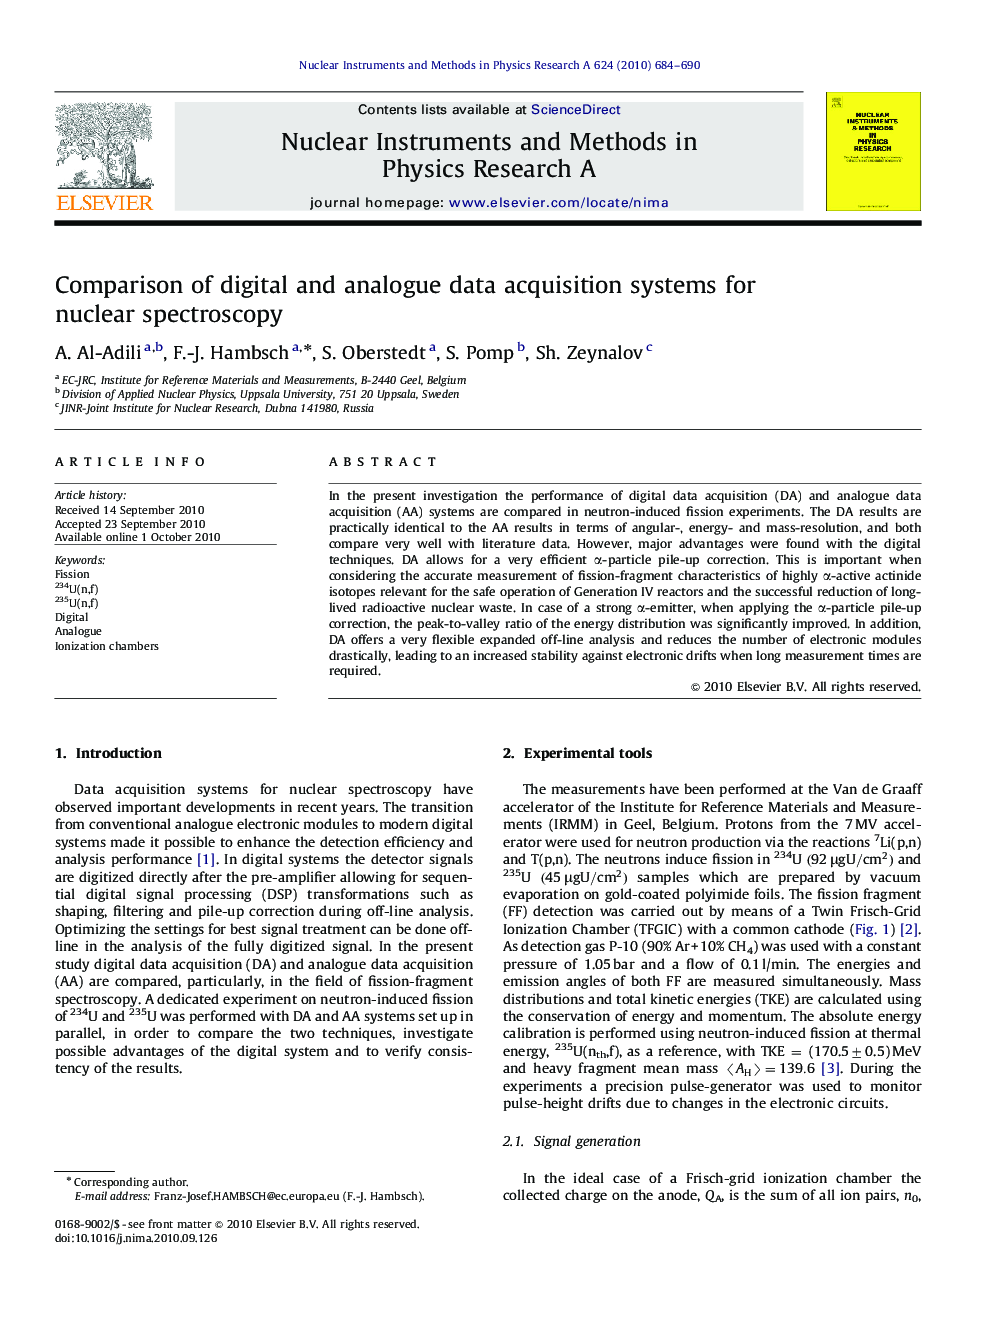 Comparison of digital and analogue data acquisition systems for nuclear spectroscopy